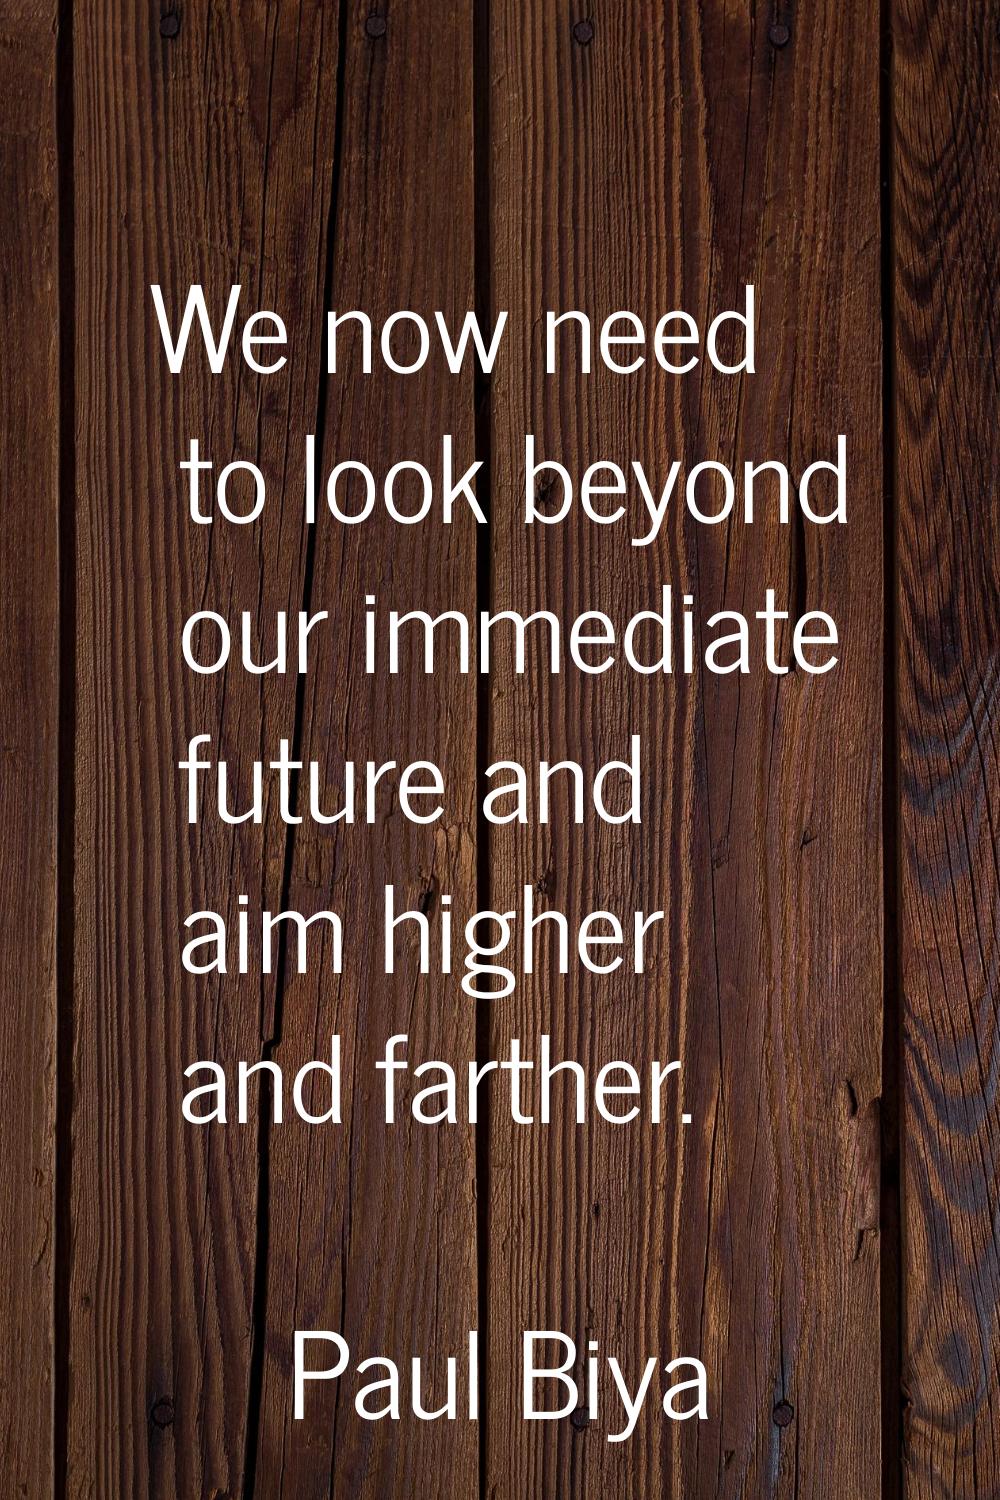 We now need to look beyond our immediate future and aim higher and farther.